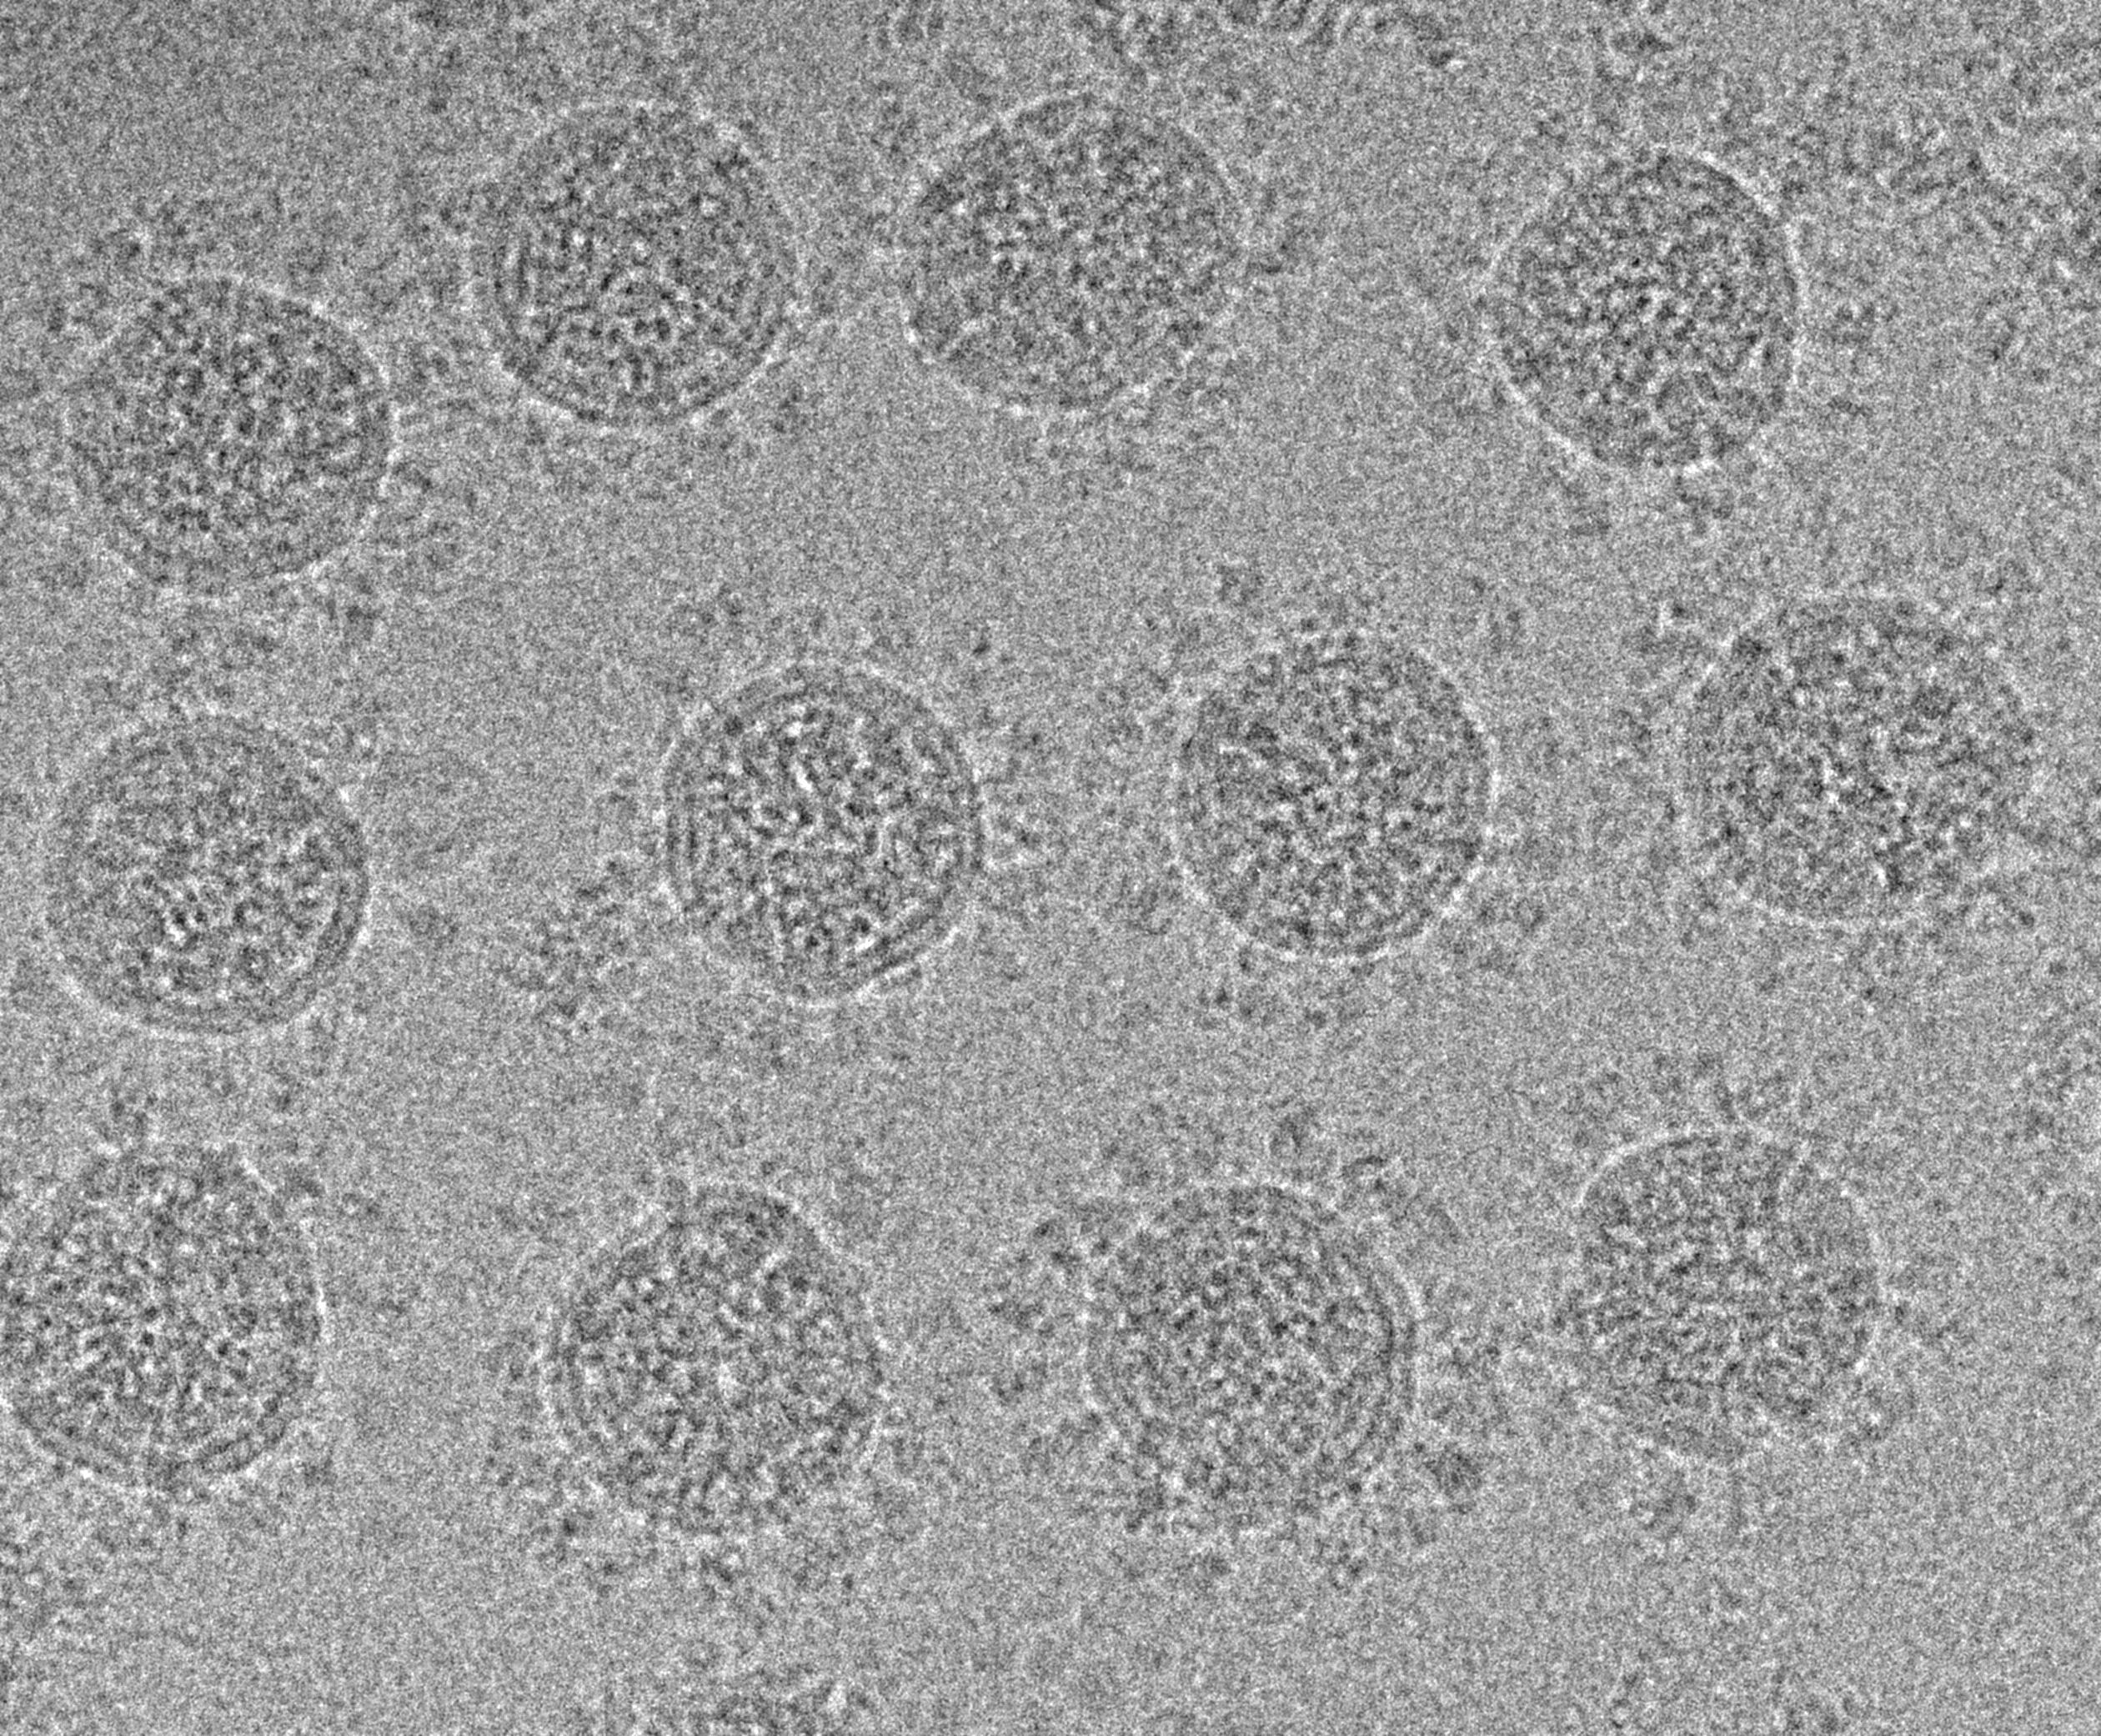 Cryoelectronic microscopy image of concentrated, PFA-fixed SARS-CoV-2 virion suspensions. Credit: van der Goot lab and D. Demurtas (BioEM EPFL Core Facility).